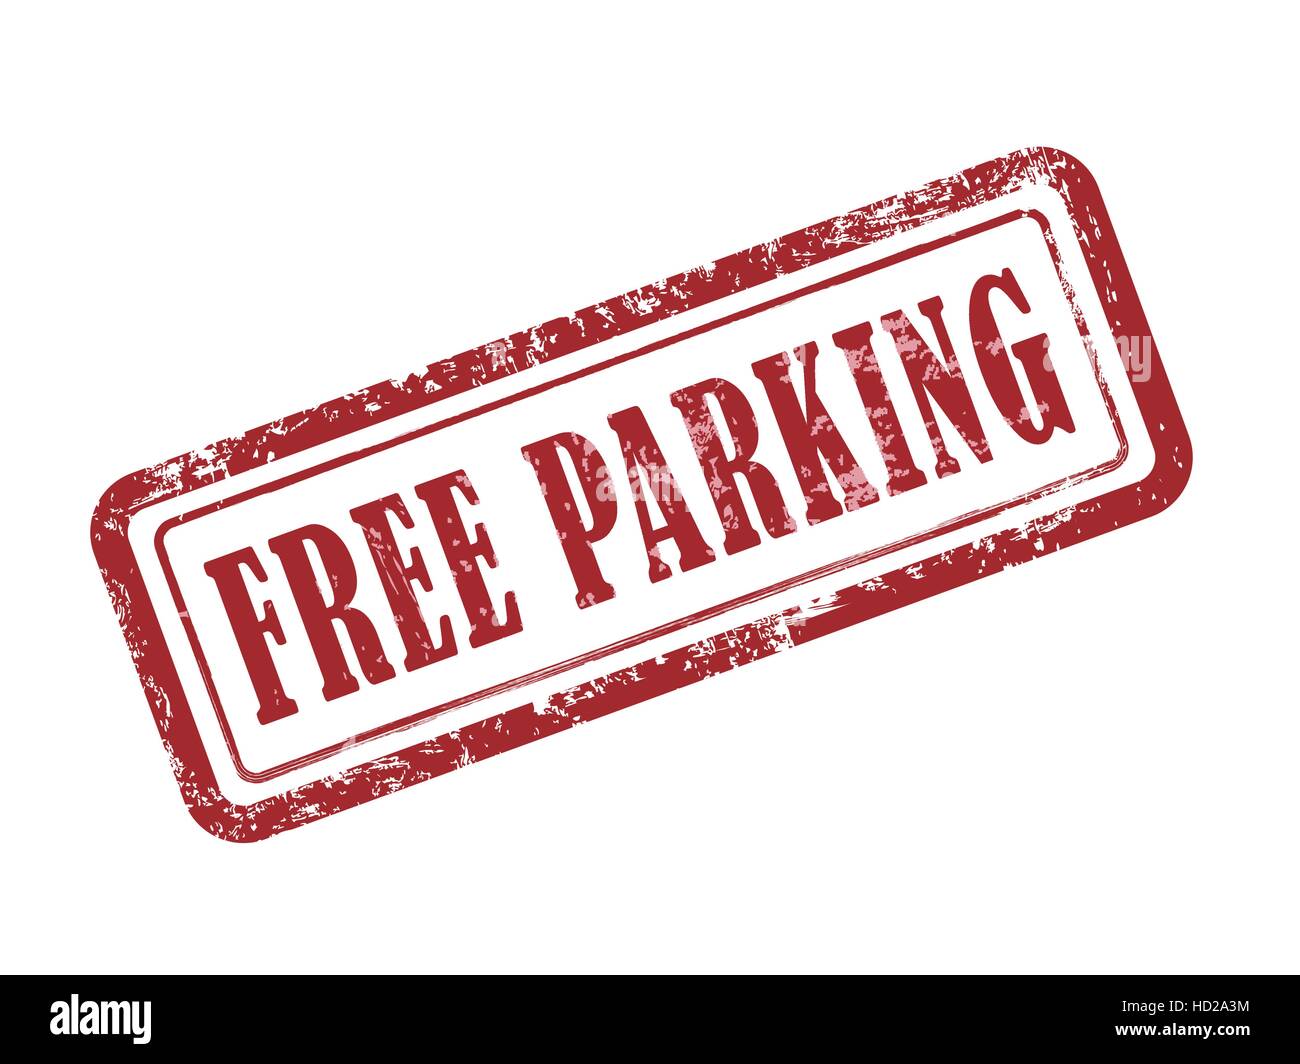 stamp free parking in red over white background Stock Vector